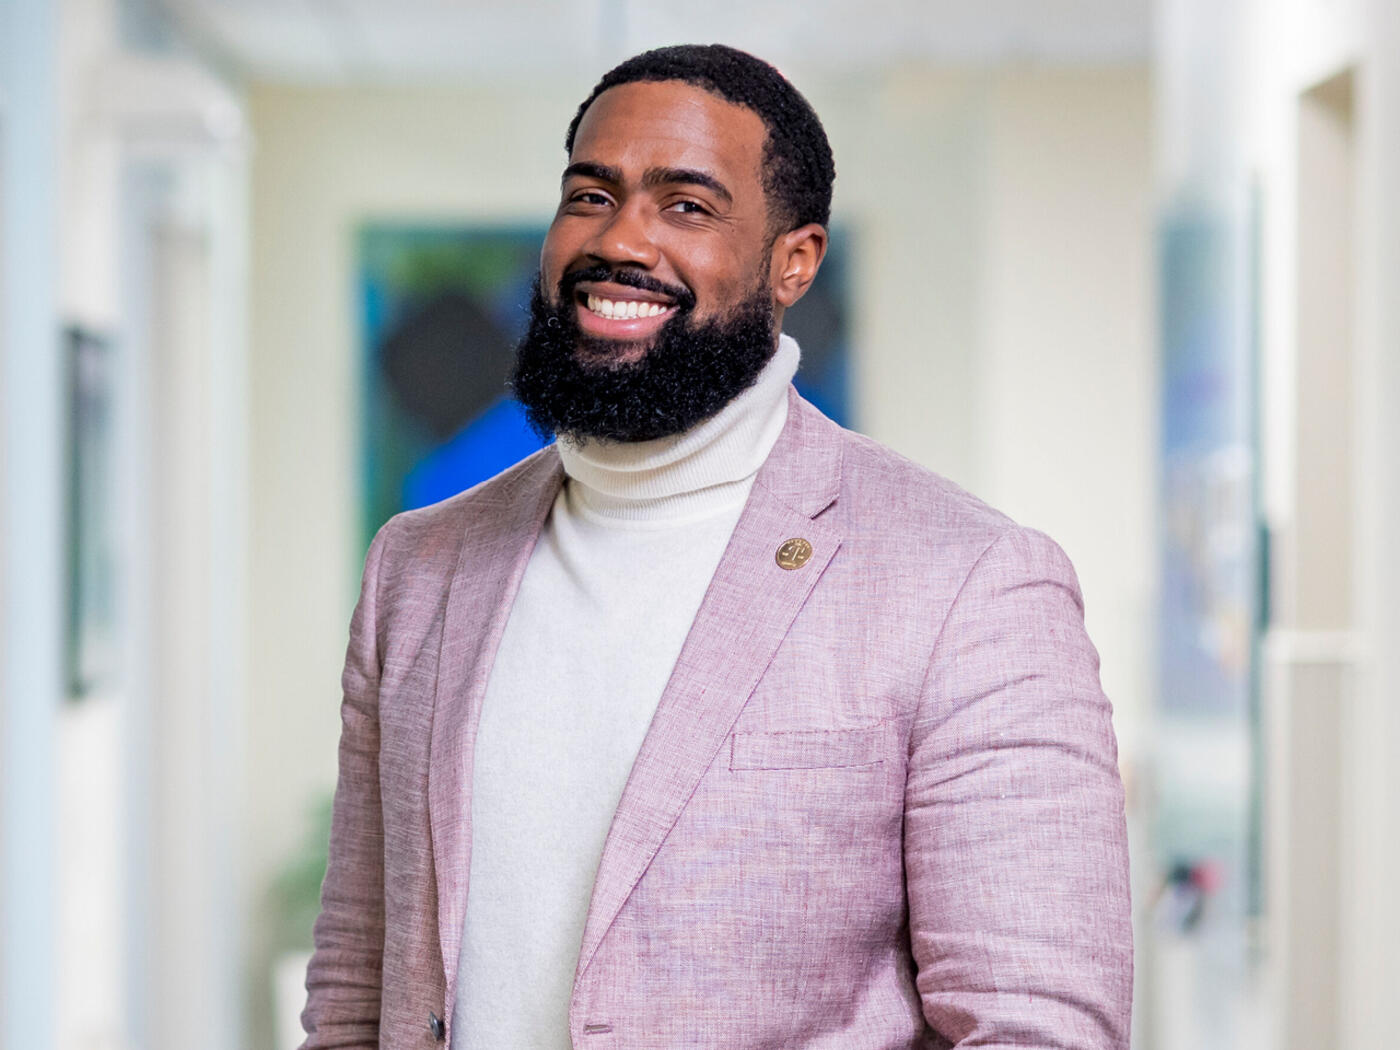 Bryan Thomas, Assistant Dean, Diversity, Equity, and Inclusion